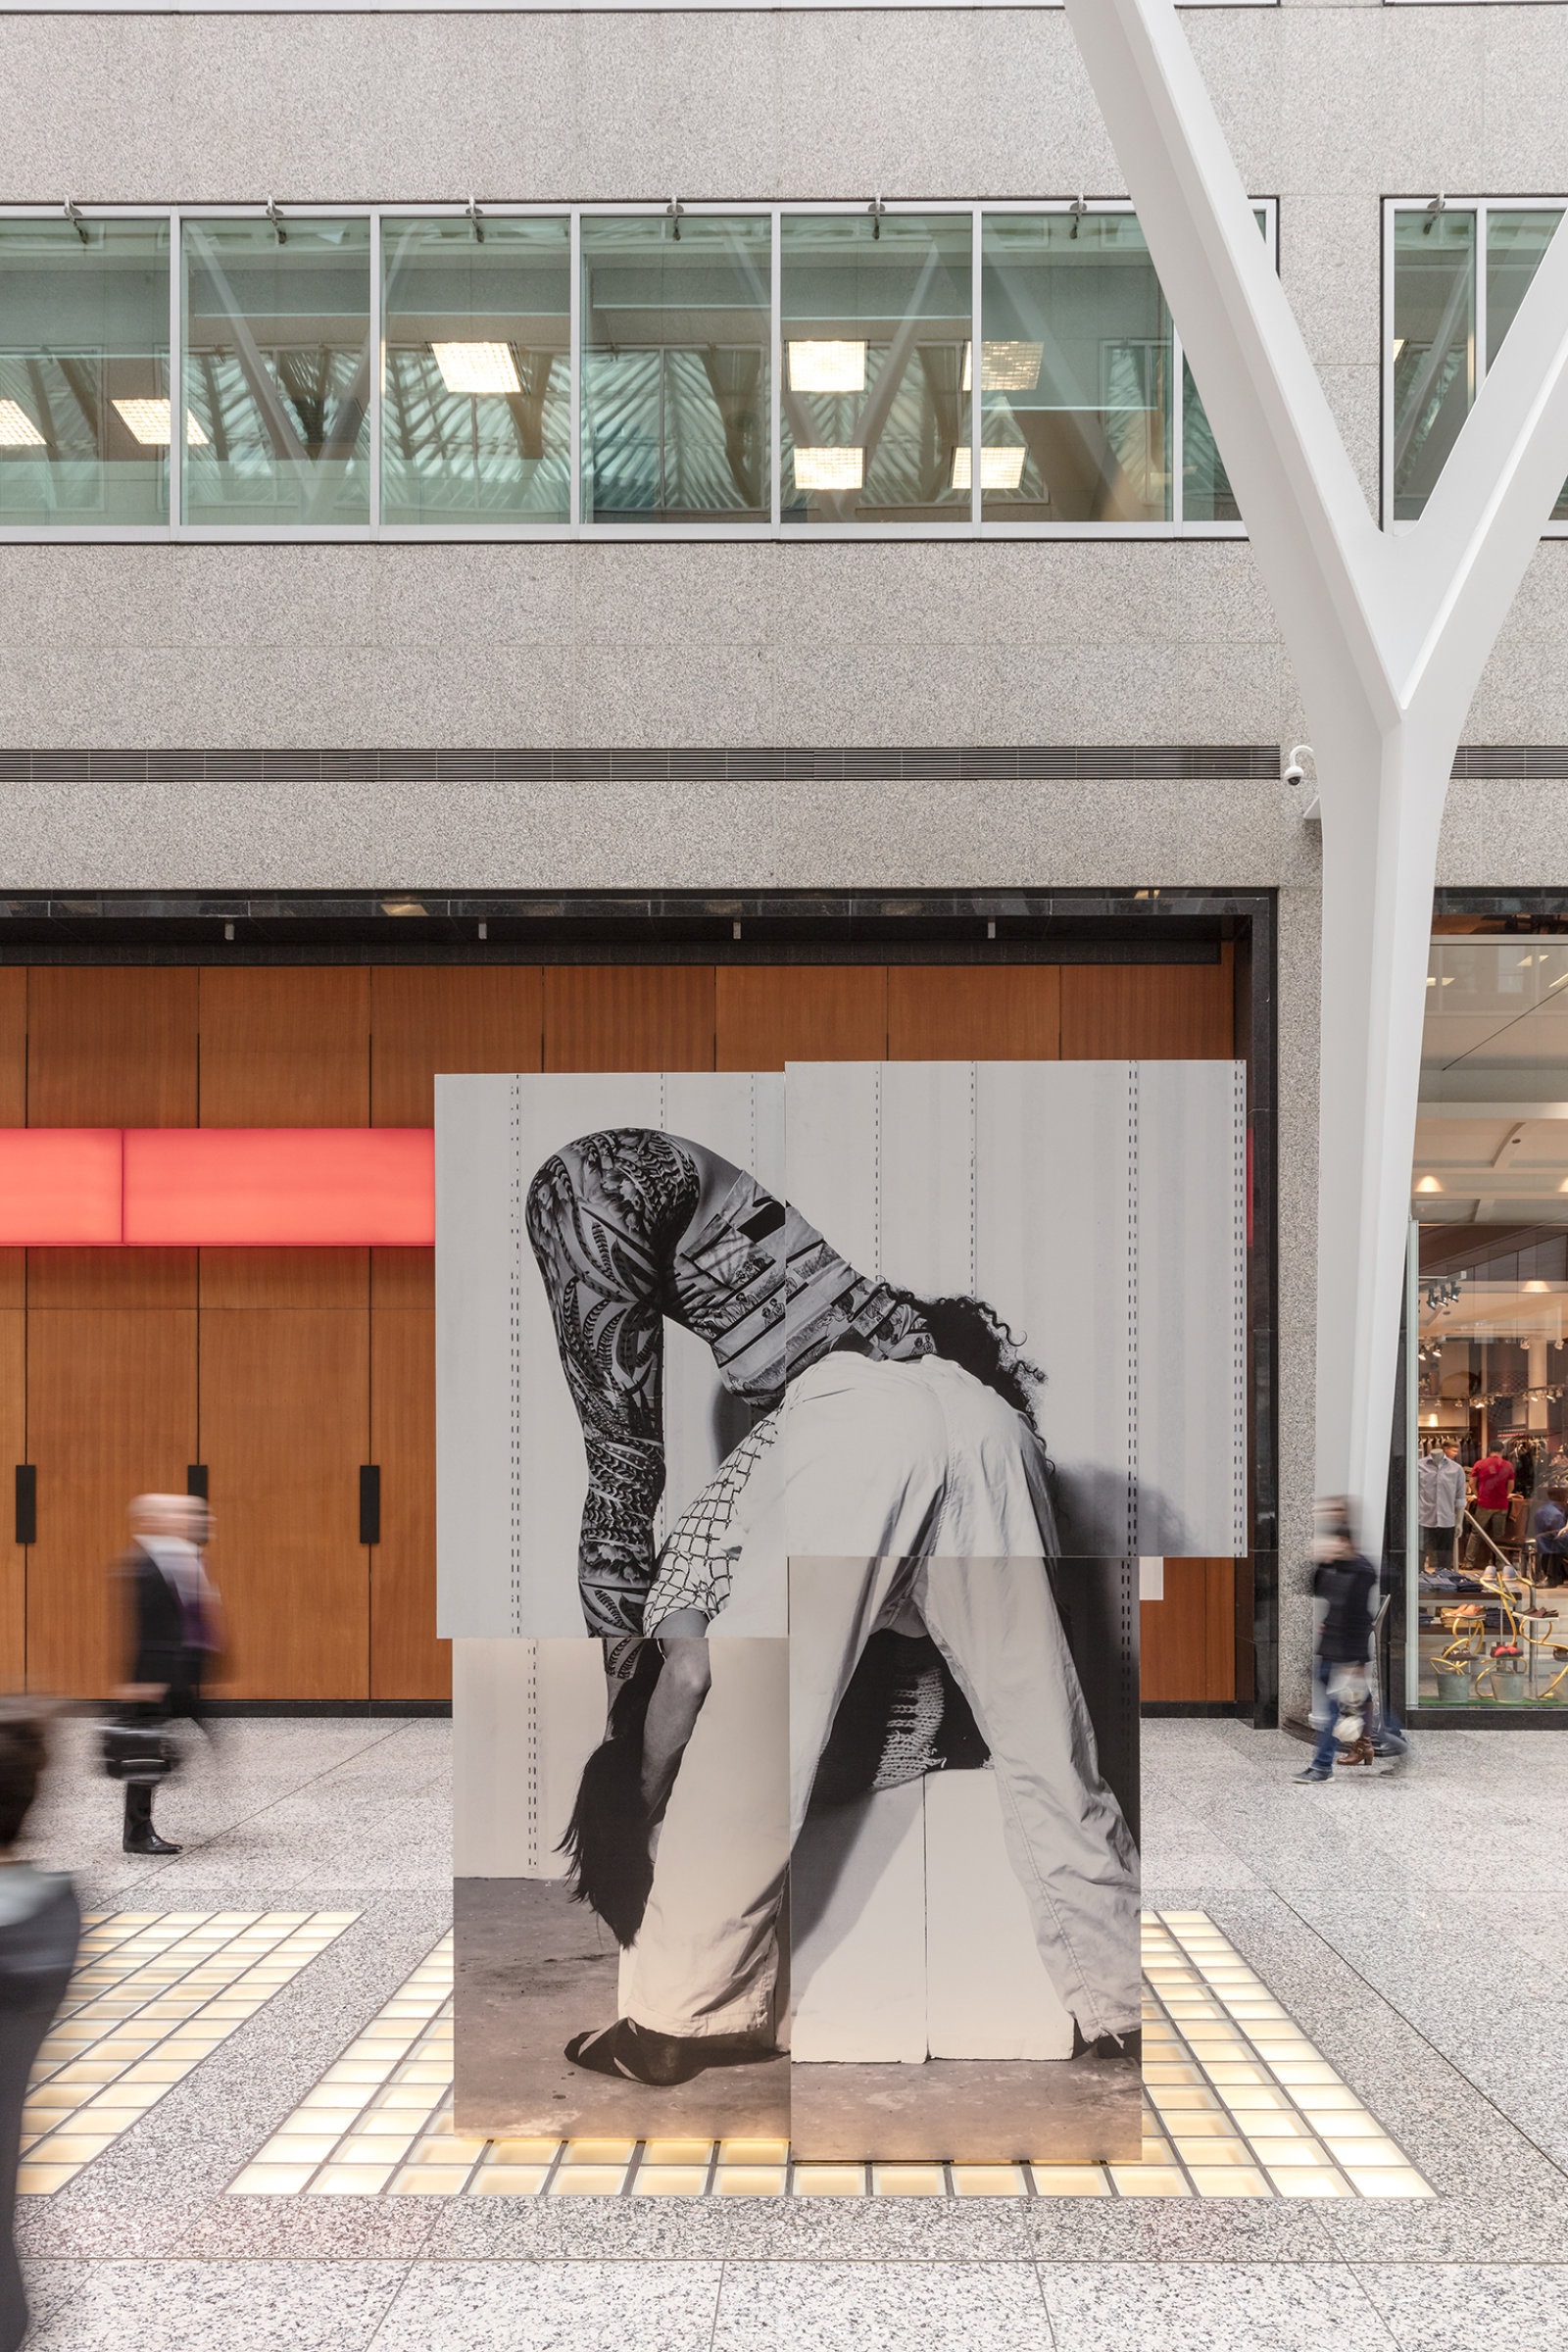 Valérie Blass, Bleached Jeans from Nous ne somme pas des héros, 2017, mixed media, dimensions variable. Installation view, Brookfield Place, Toronto, ON, 2017